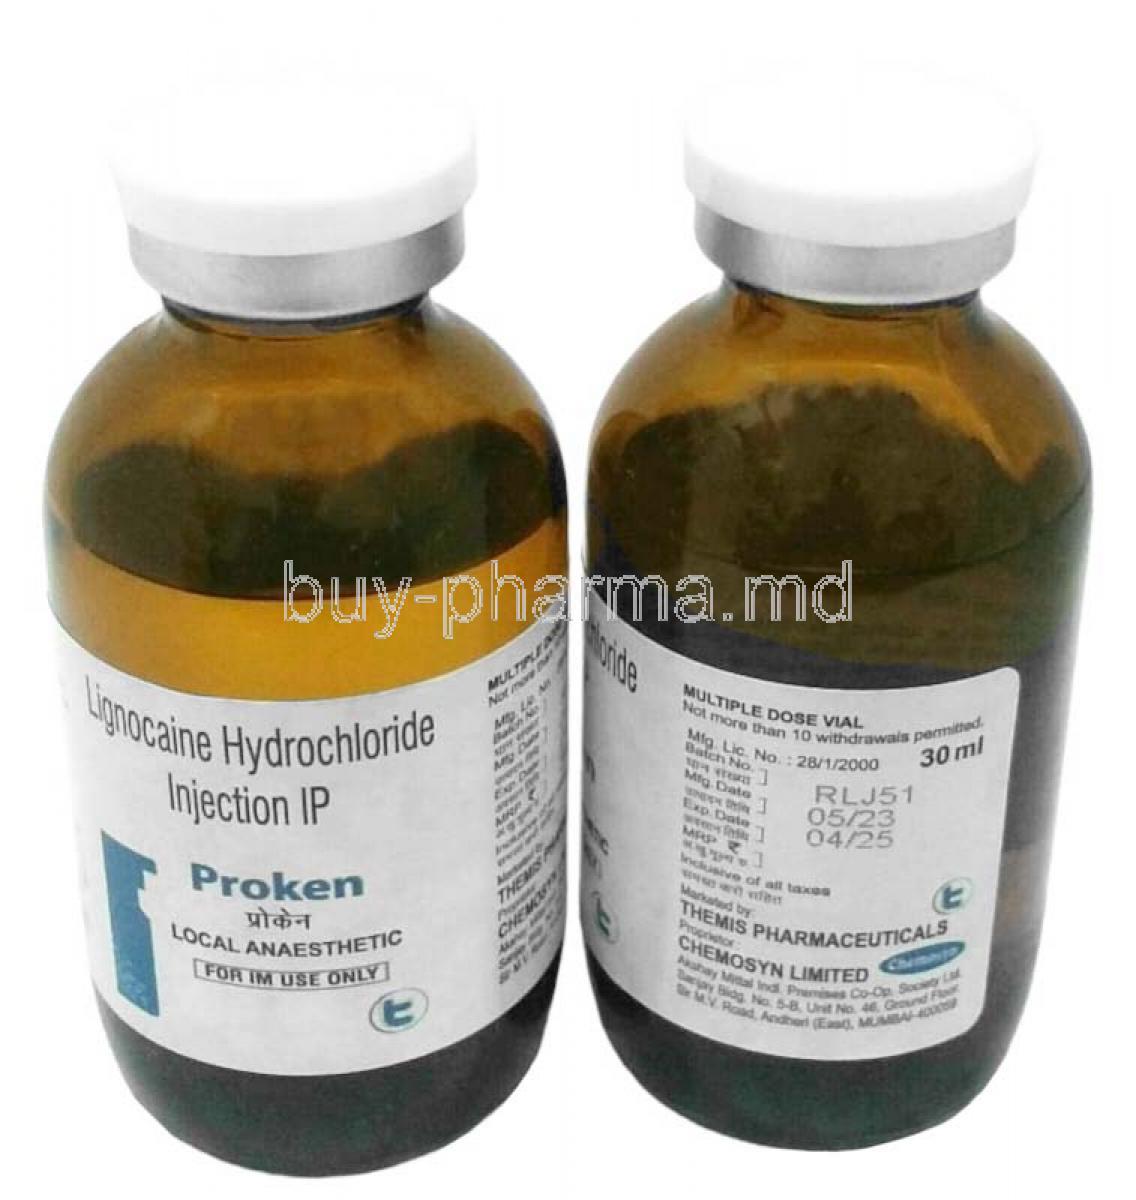 Proken Injection, Lignocaine 2%, Injection 30mL, Themis Pharmaceuticals, Bottle front and back view